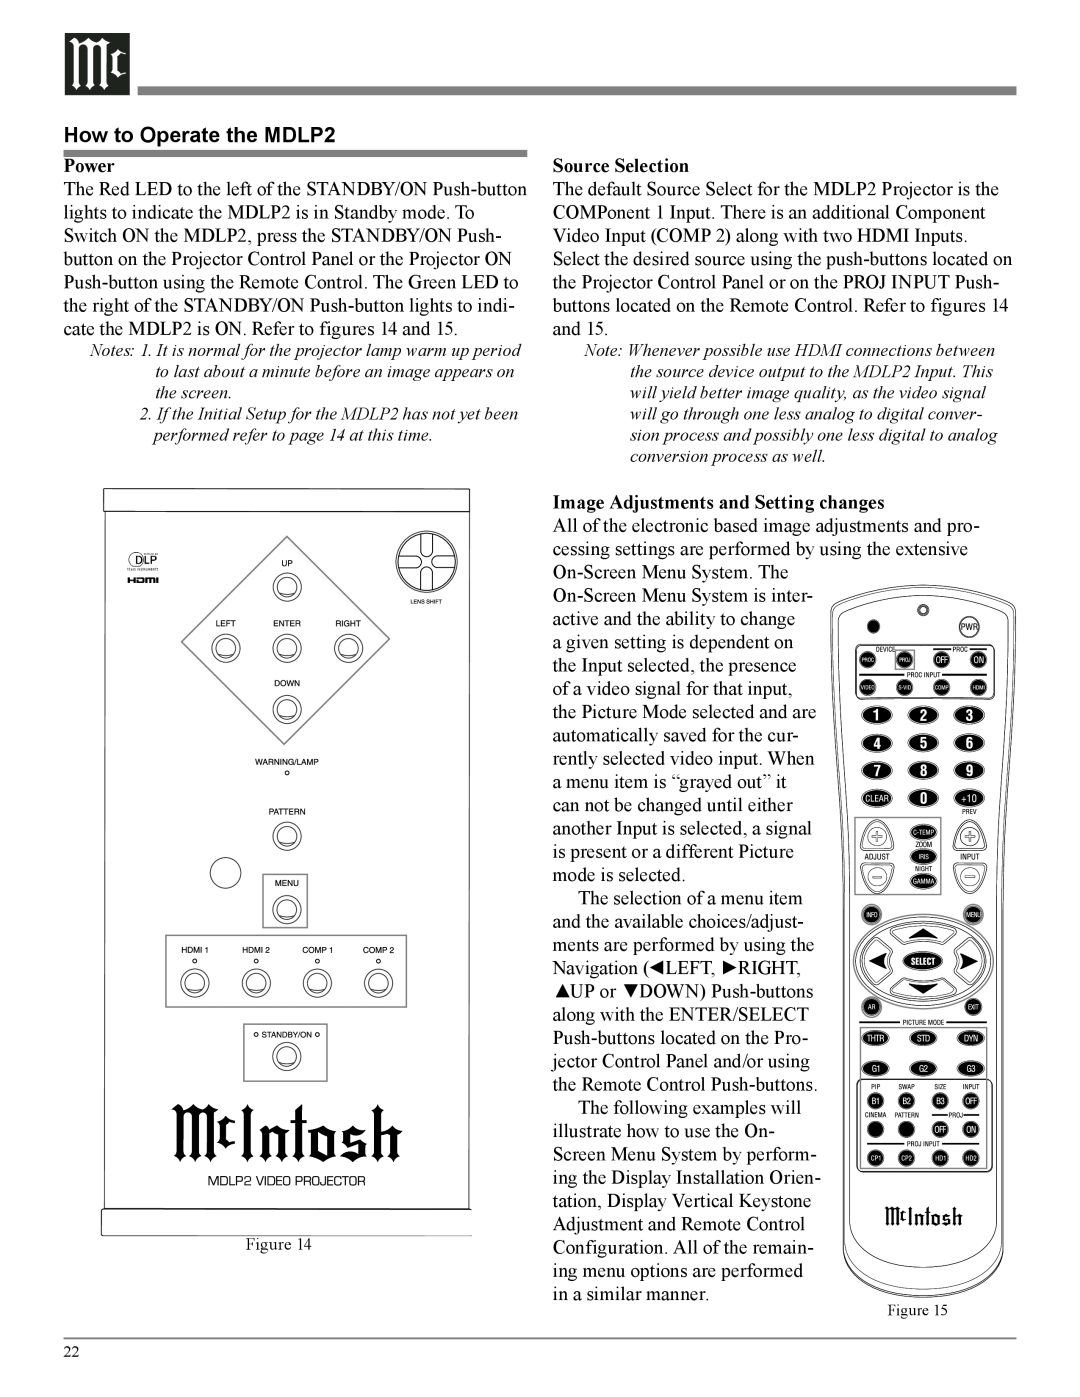 McIntosh owner manual How to Operate the MDLP2, Power, Source Selection, Image Adjustments and Setting changes 